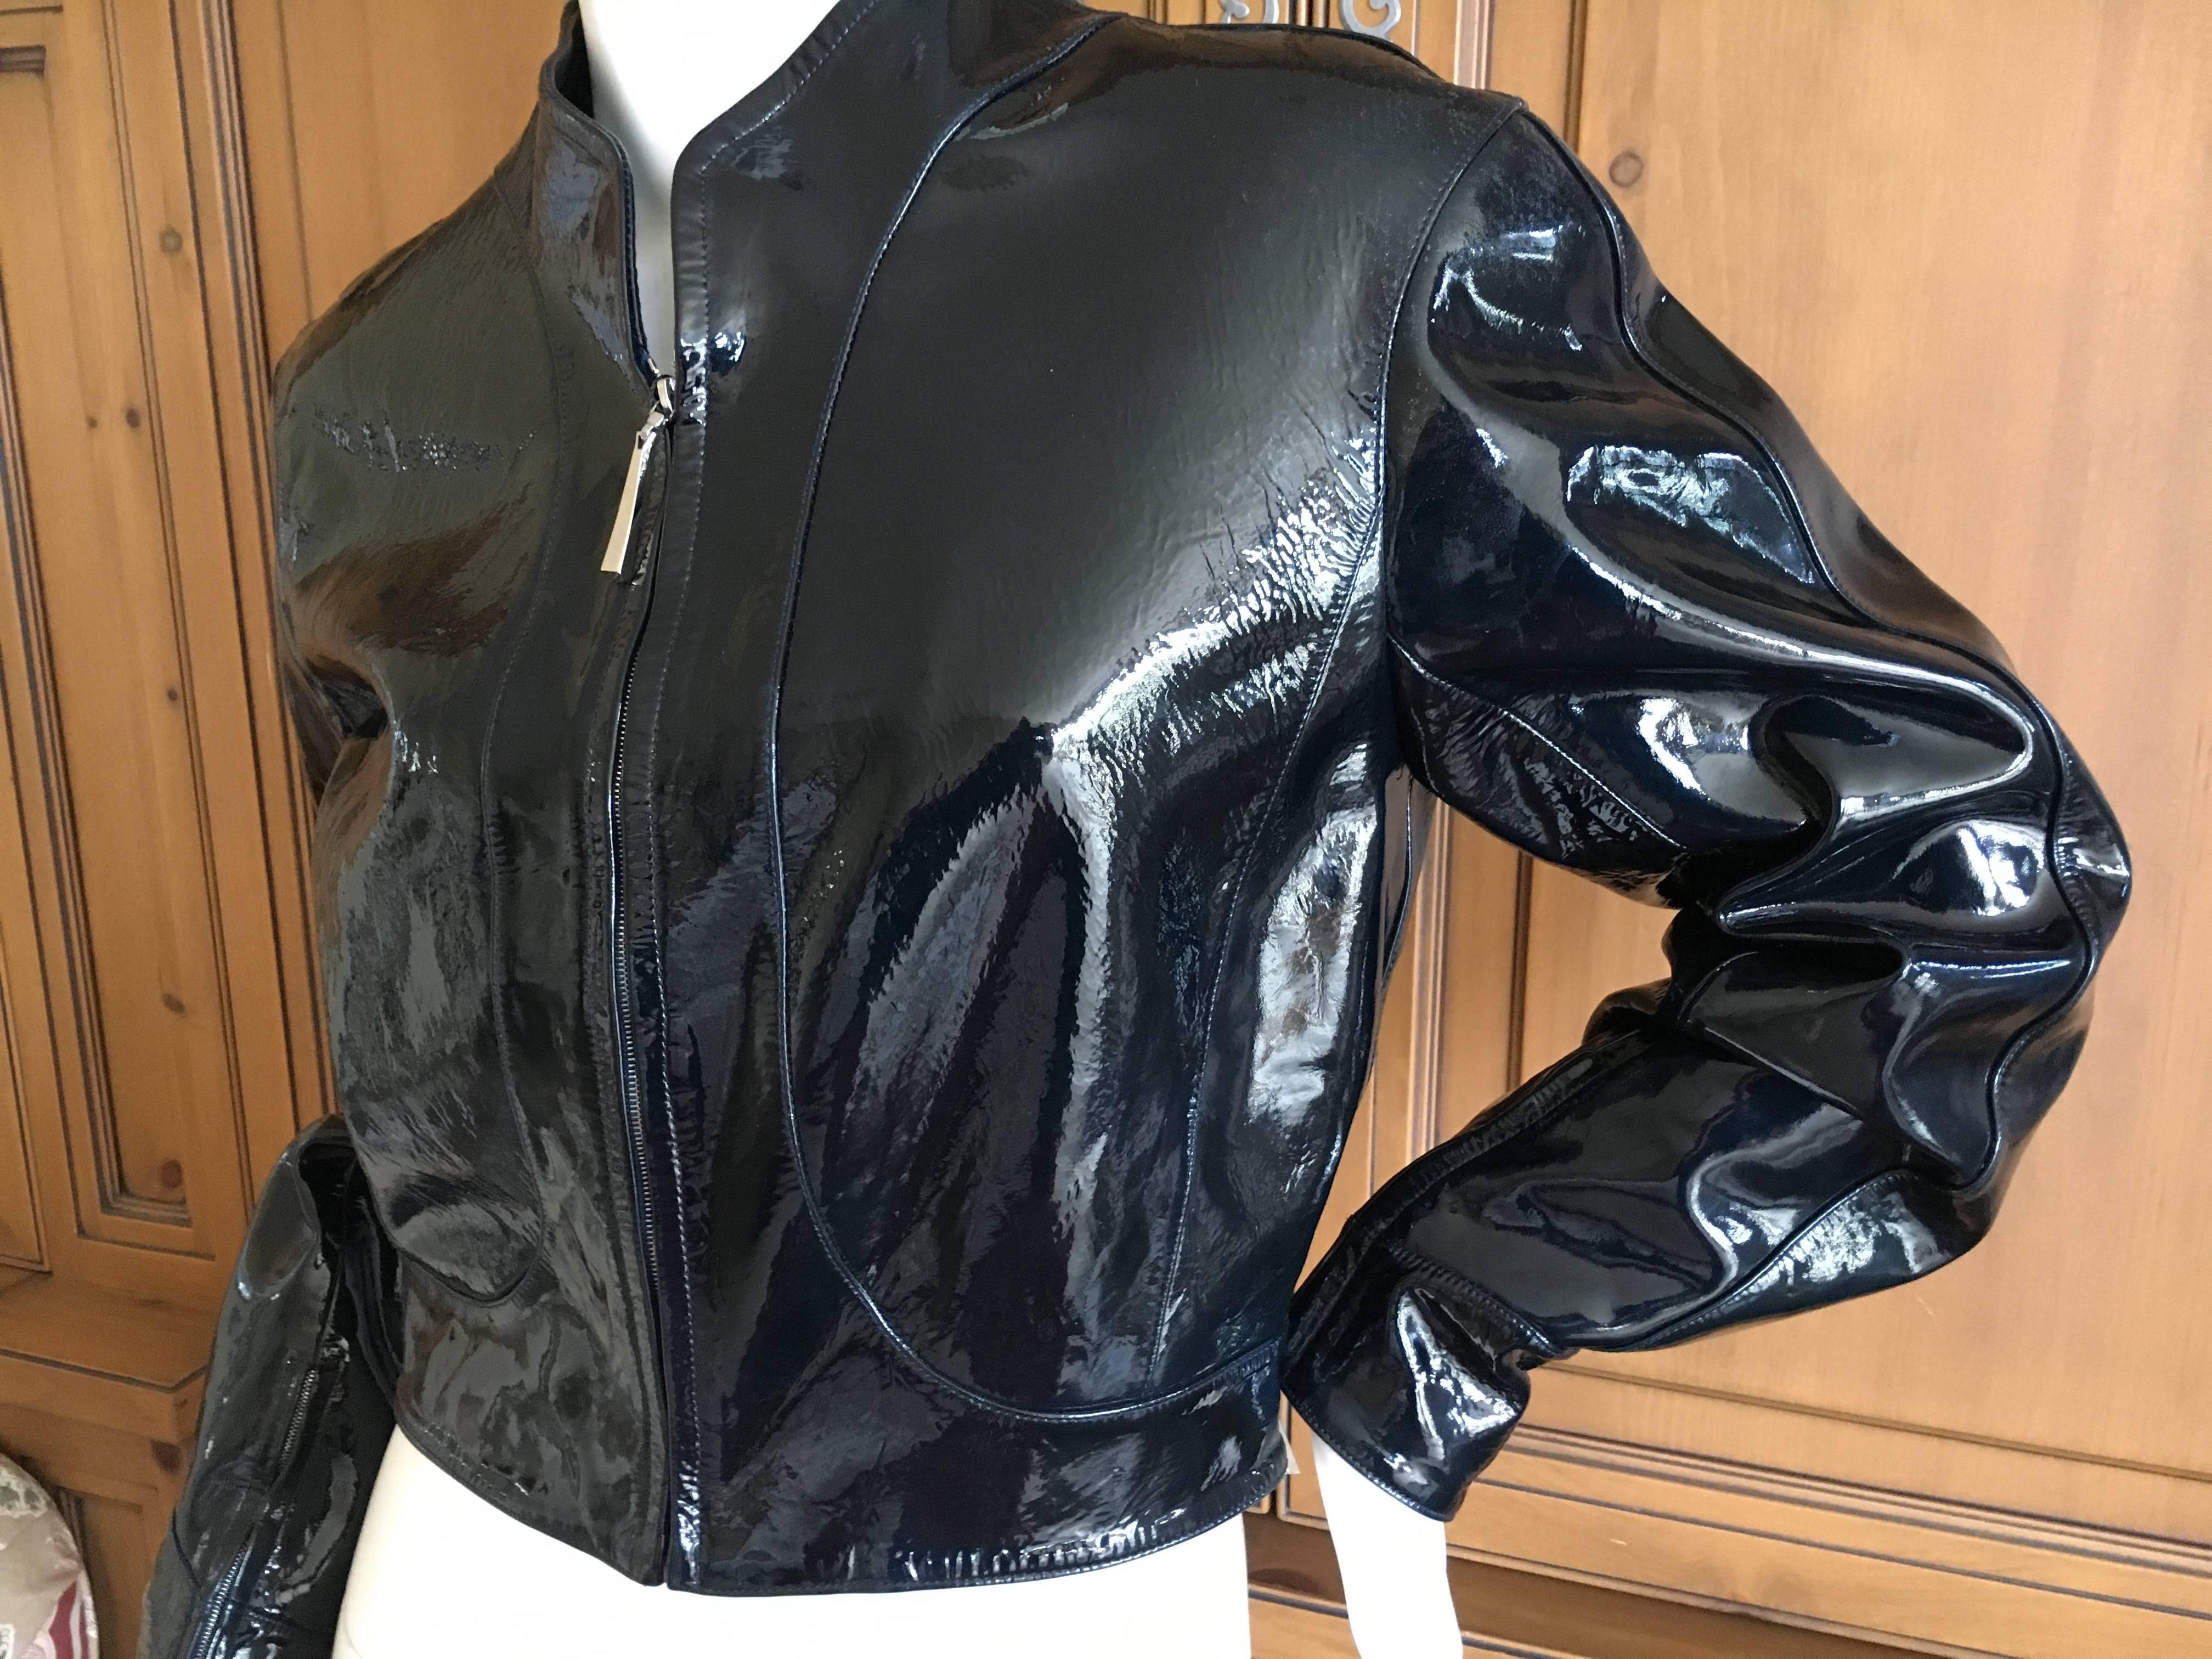 Wonderful dark navy blue patent goatskin leather cropped jacket from Thiuerry Mugler Couture, circa 1988.
This is a very dark navy blue, but it can appear black in some light.
Size 38
Bust 38"
Waist 29"
Length 18"
Sleeve